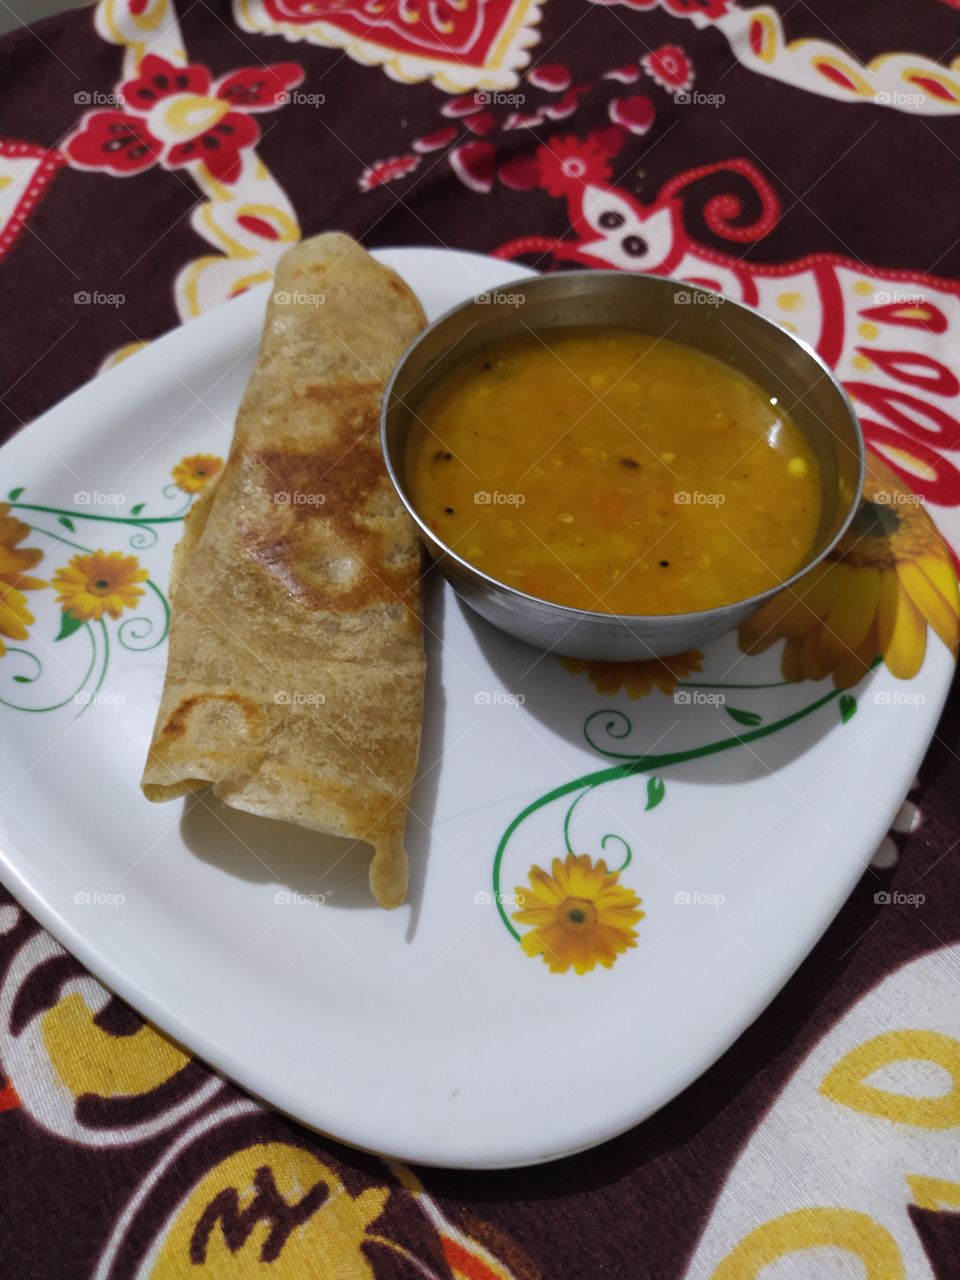 A dosa is a cooked flat thin layered rice batter, originating from the Indian subcontinent, made from a fermented batter. It is somewhat similar to a crepe in appearance. Its main ingredients are rice and black gram ground together in a fine, smooth.